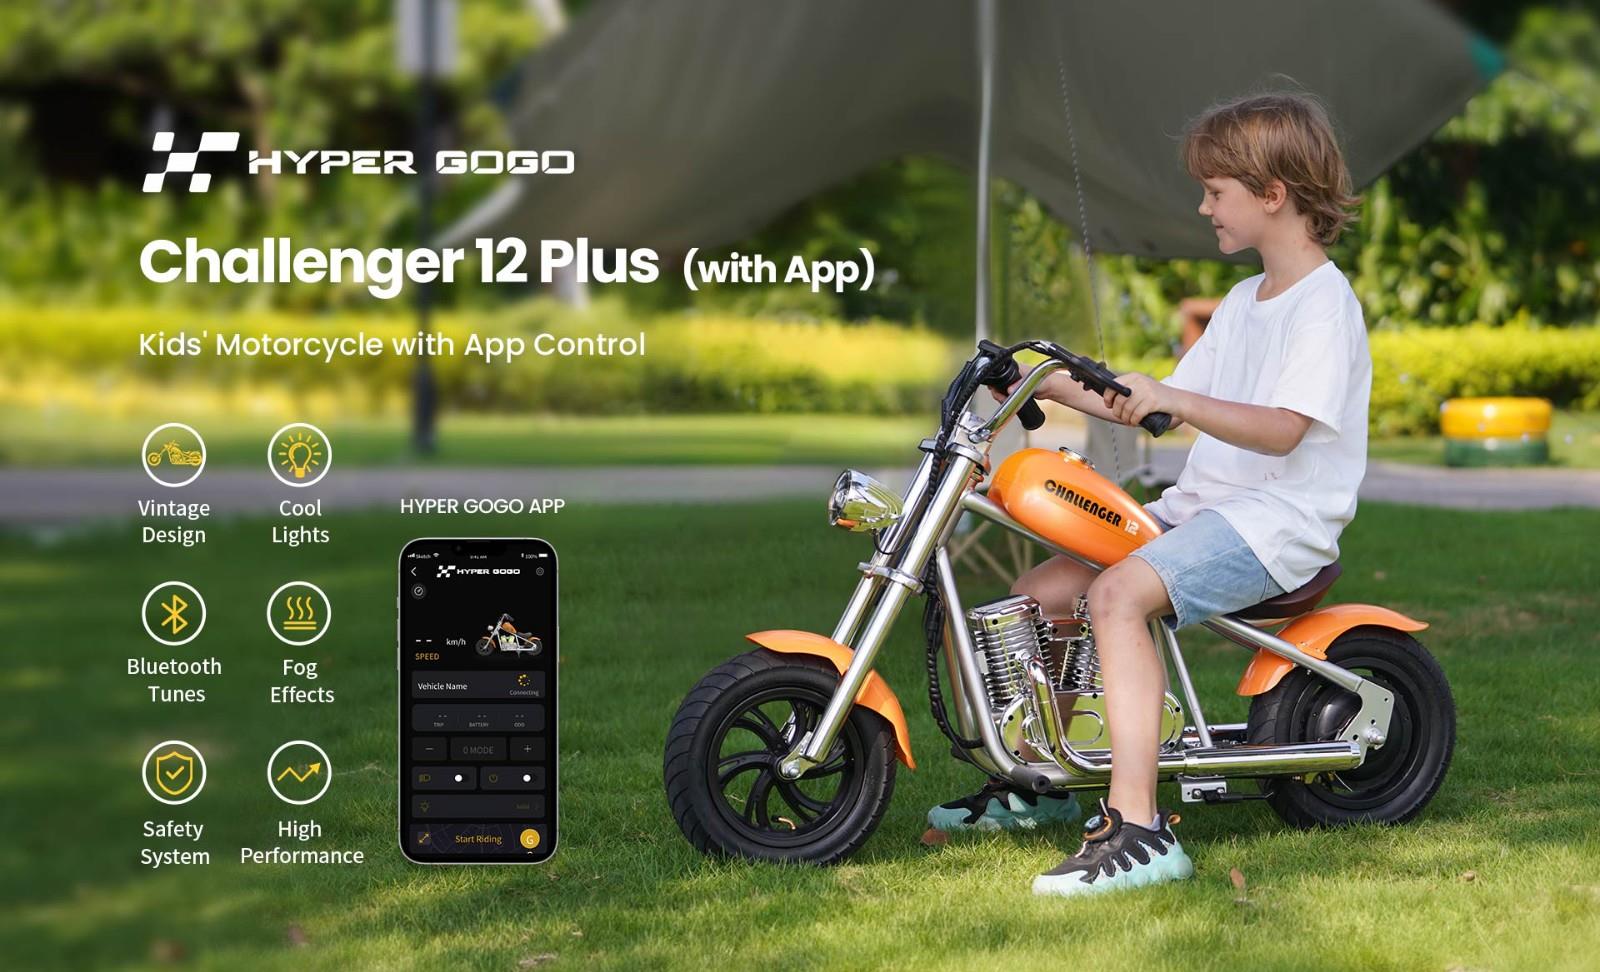 Hyper GOGO Challenger 12 Plus Electric Motorcycle with App for Kids, 12 x 3 Tires, 160W, 5.2Ah, Bluetooth Speaker - Blue